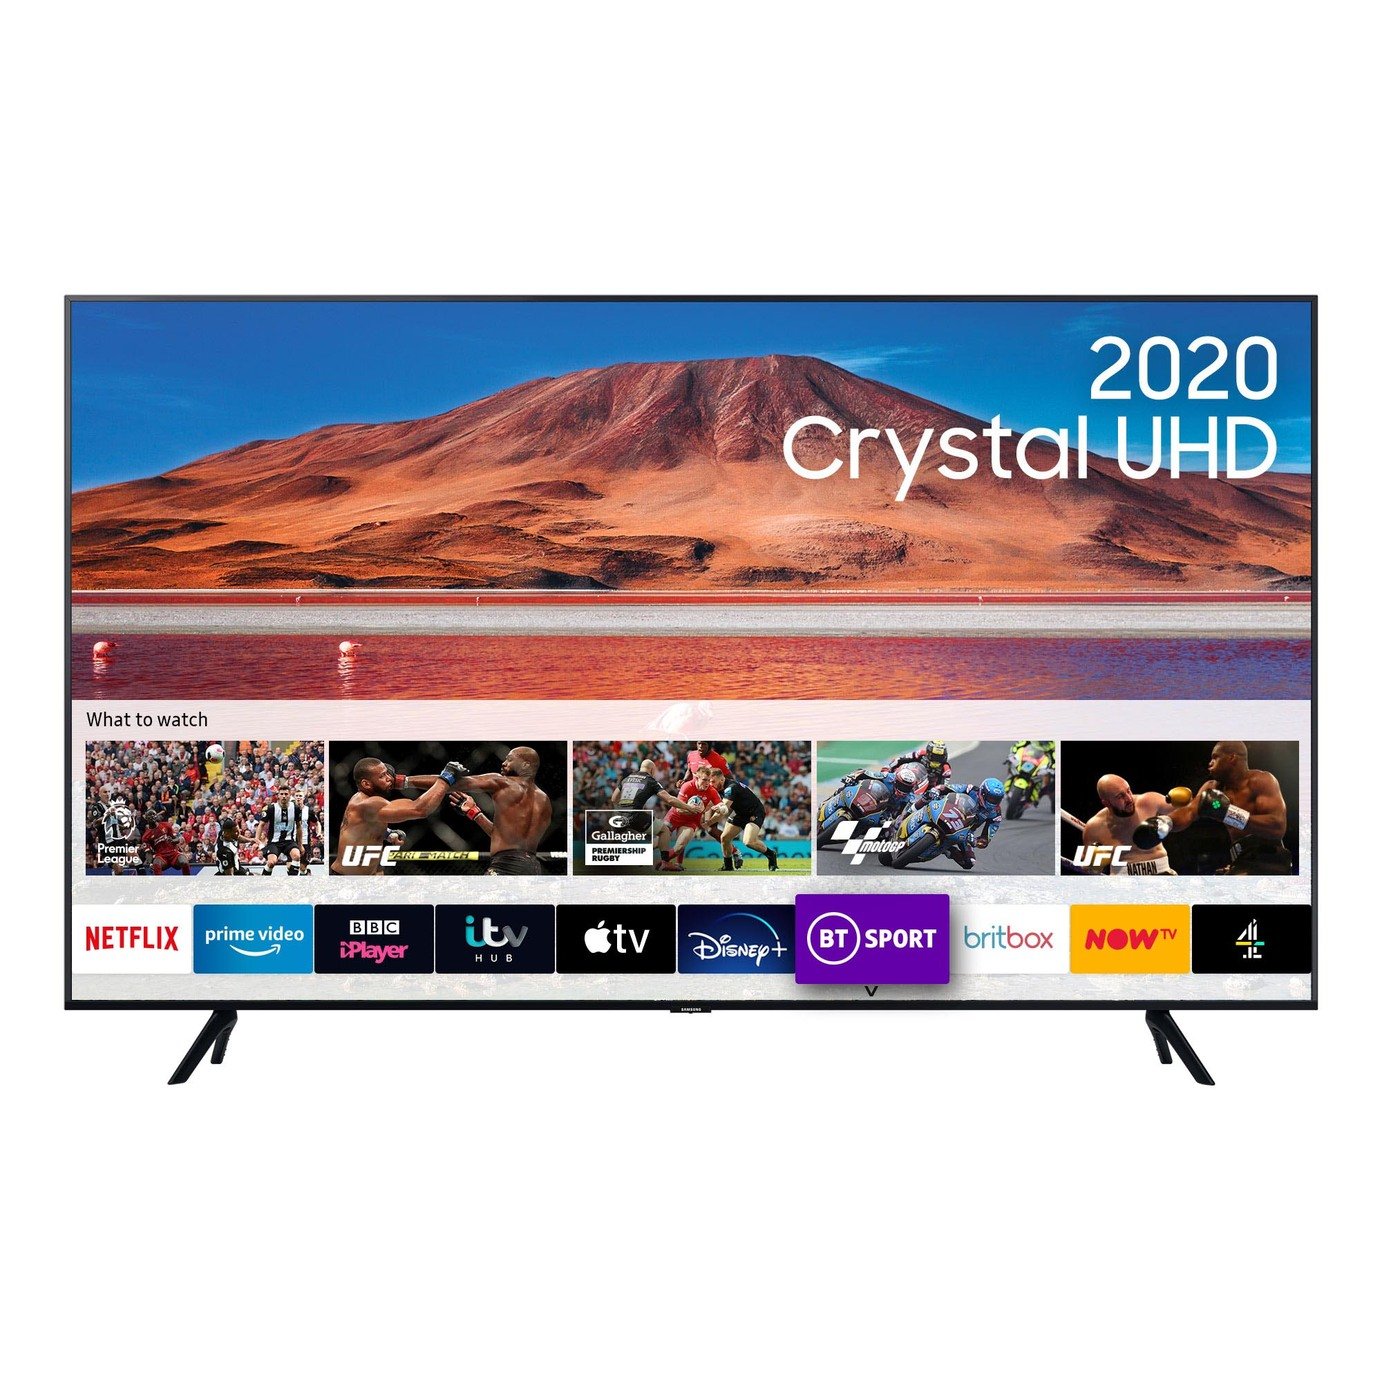 Samsung 55 Inch UE55TU7000KXXU Smart 4K Ultra HD TV with HDR Review